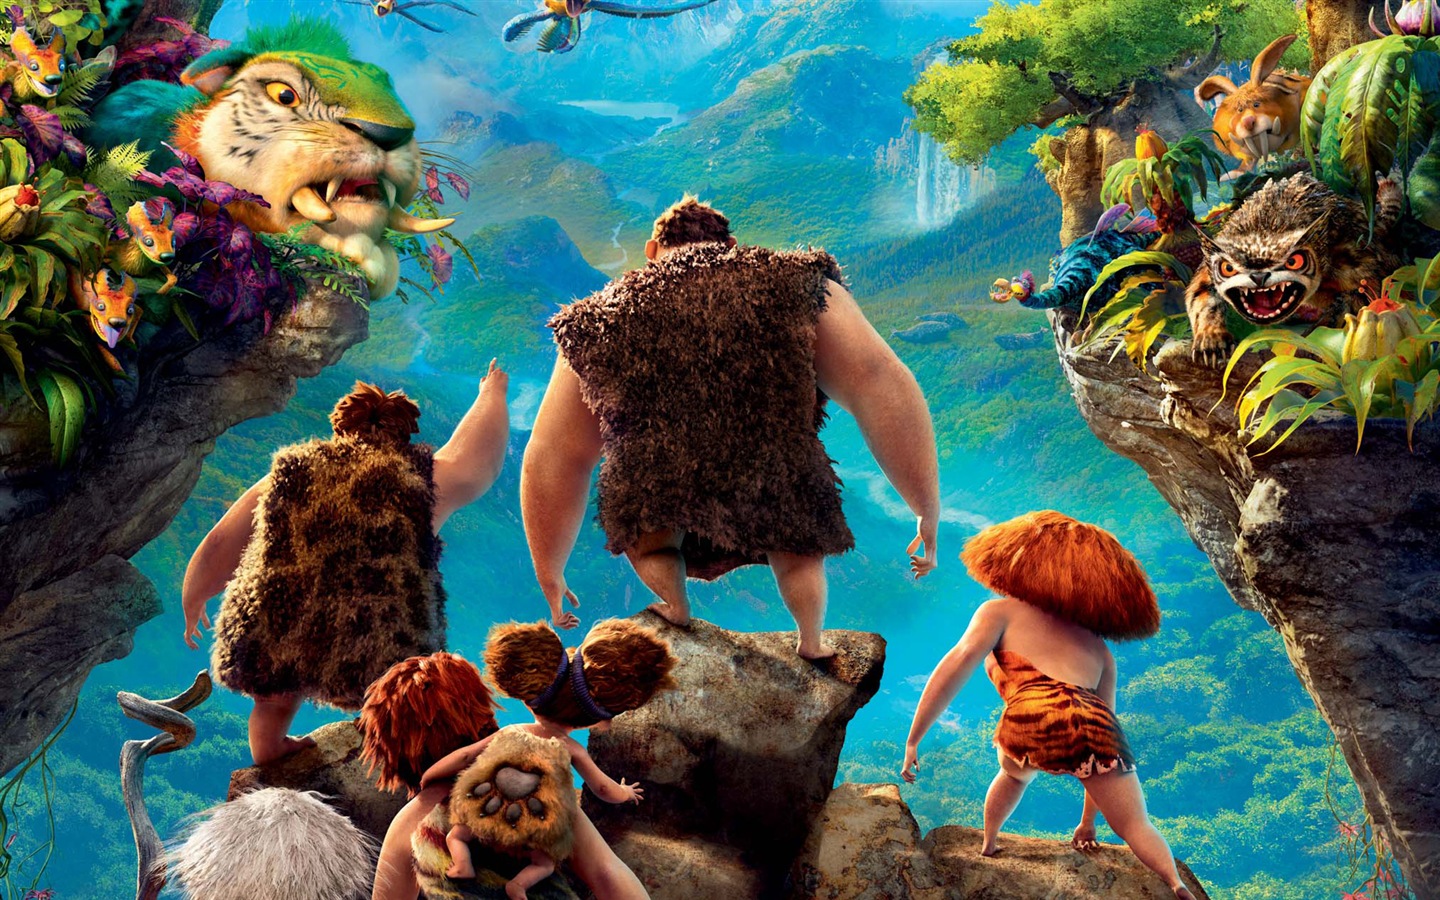 The Croods HD movie wallpapers #5 - 1440x900